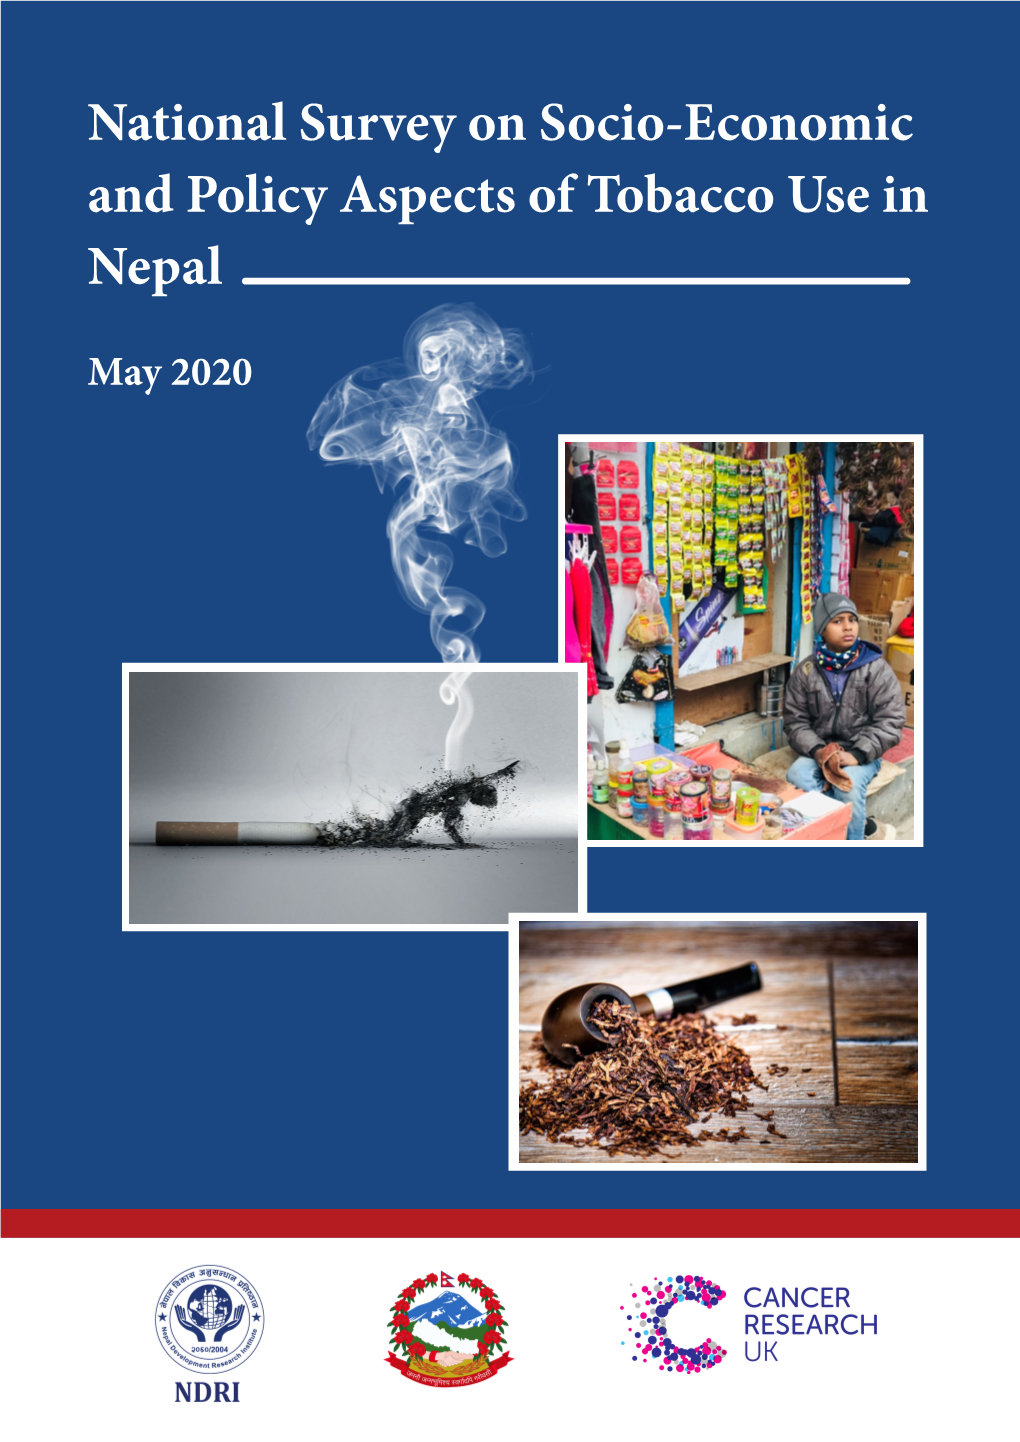 National Survey on Socio-Economic and Policy Aspects of Tobacco Use in Nepal